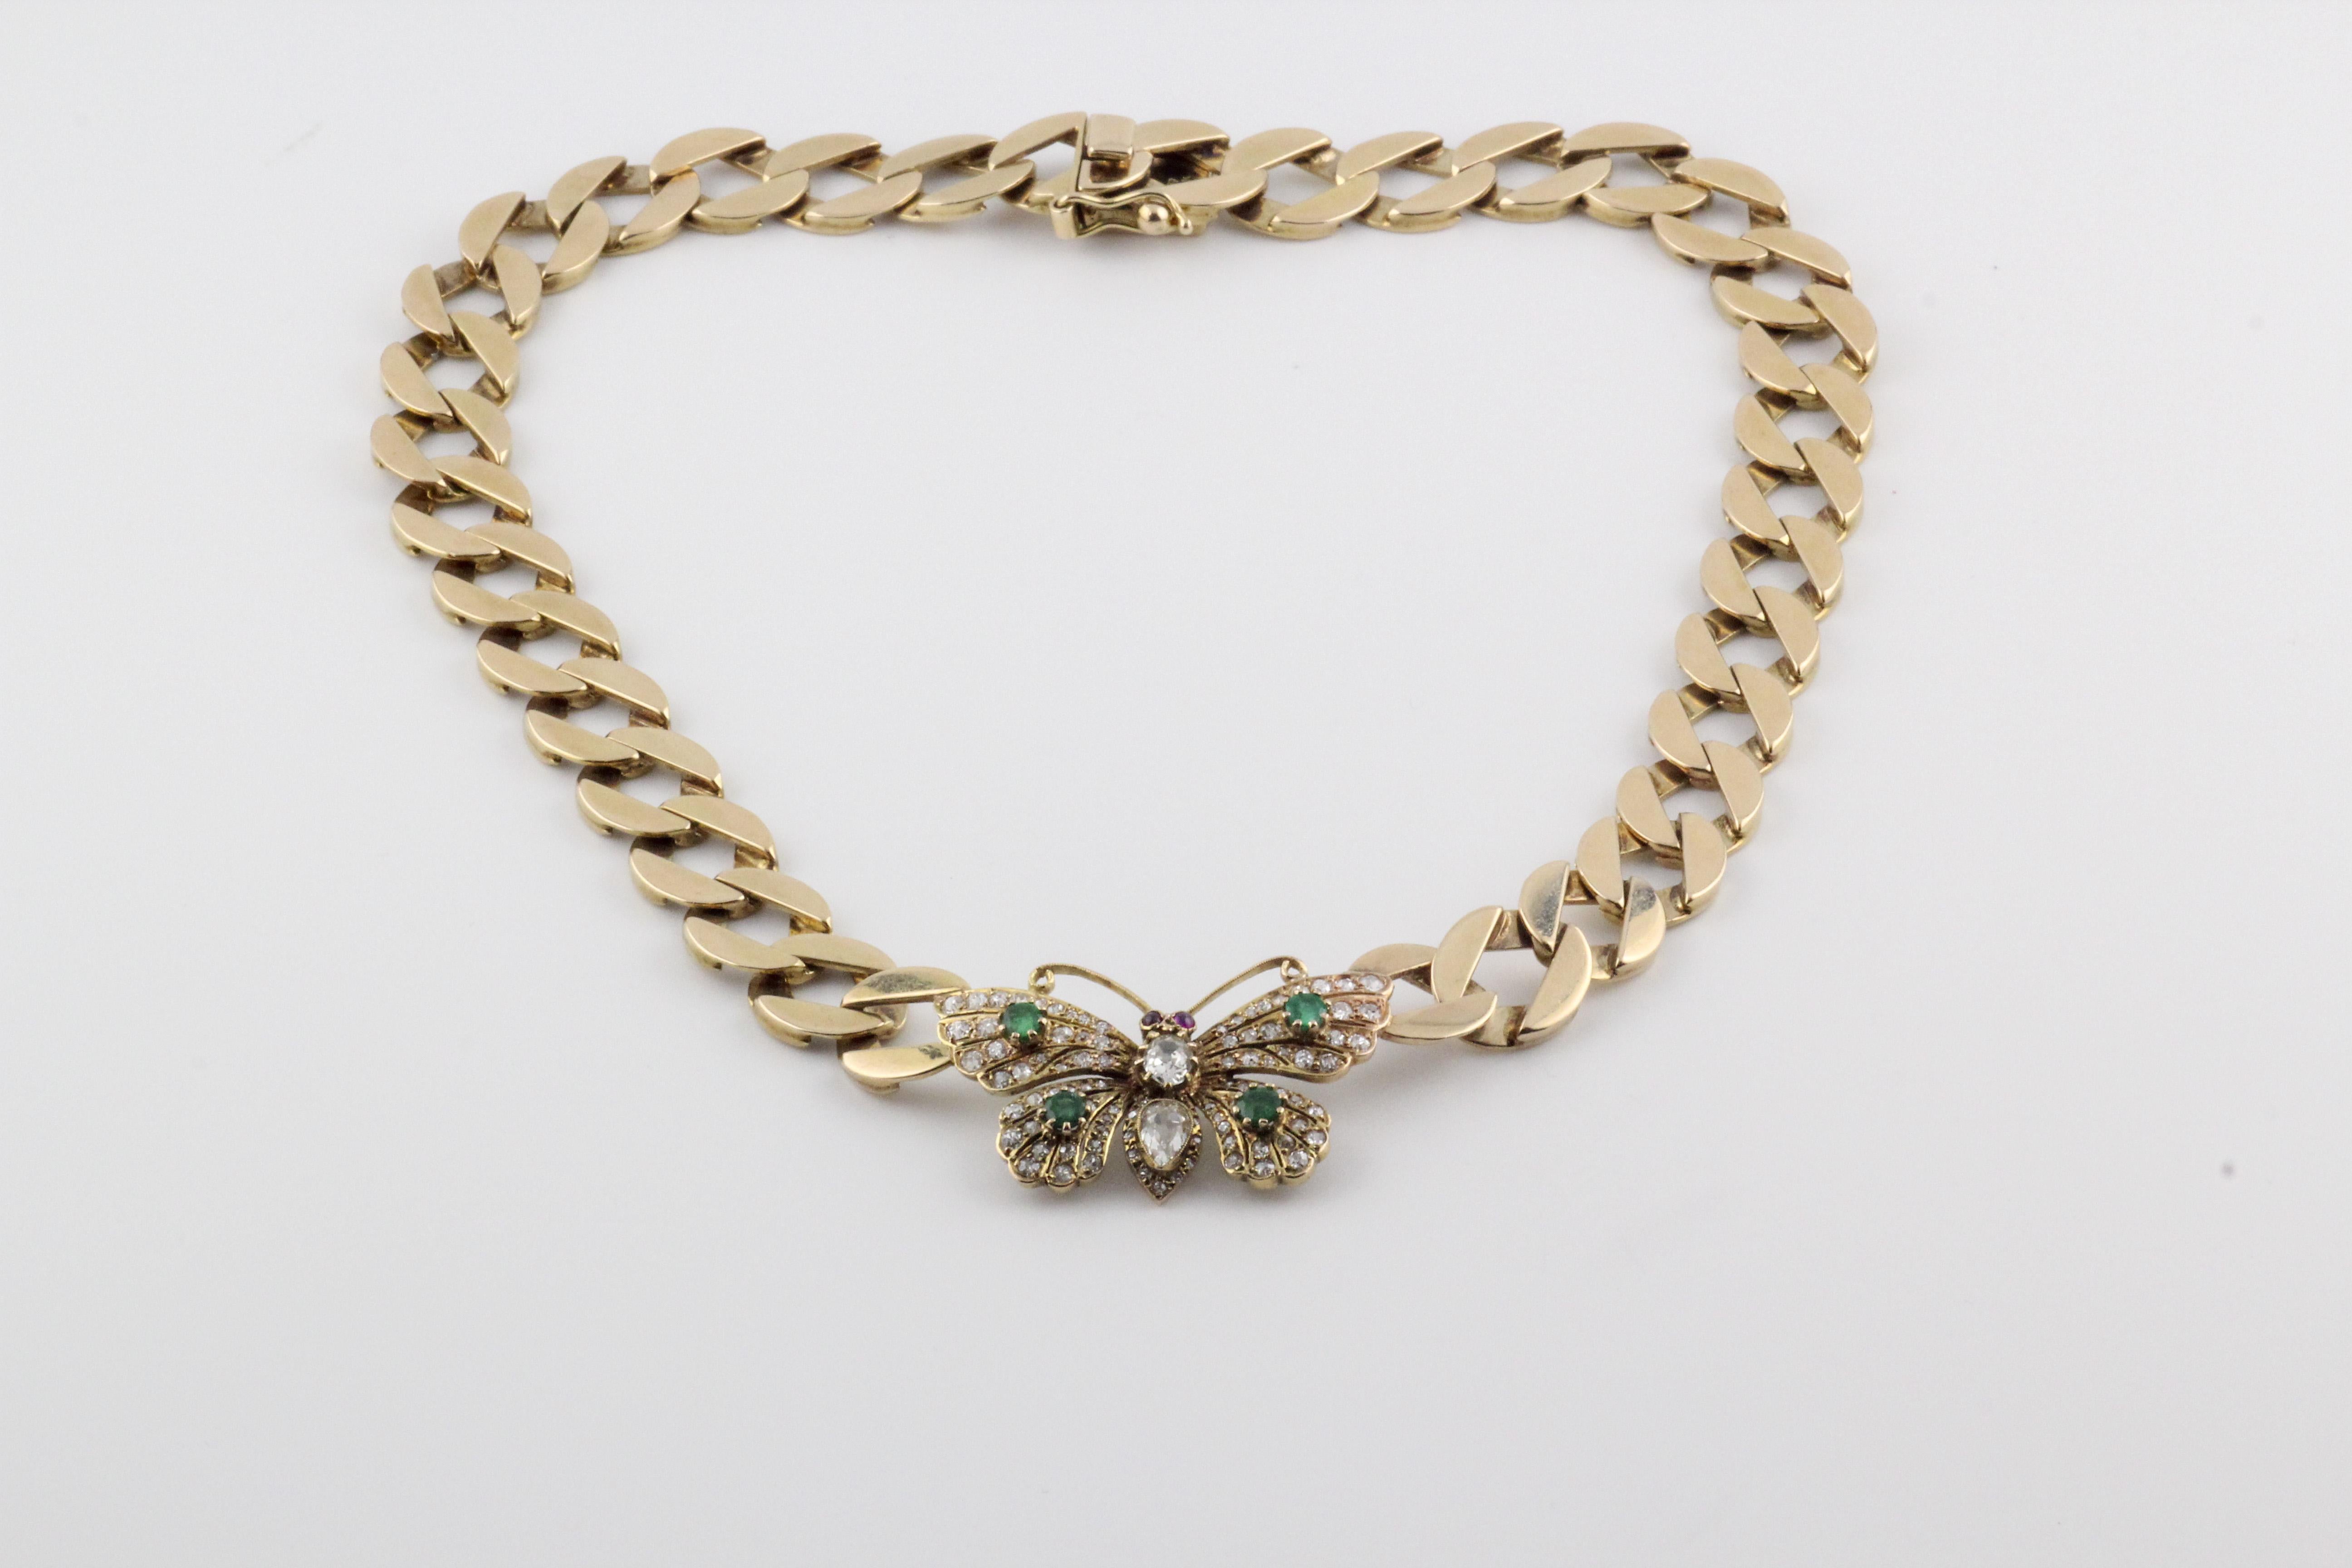 The Vintage Butterfly Diamond Ruby and Emeralds Necklace in 14K Yellow Gold is a unique and enchanting piece of jewelry that captures the beauty of nature with an exquisite blend of gemstones and craftsmanship. This vintage necklace is a true work